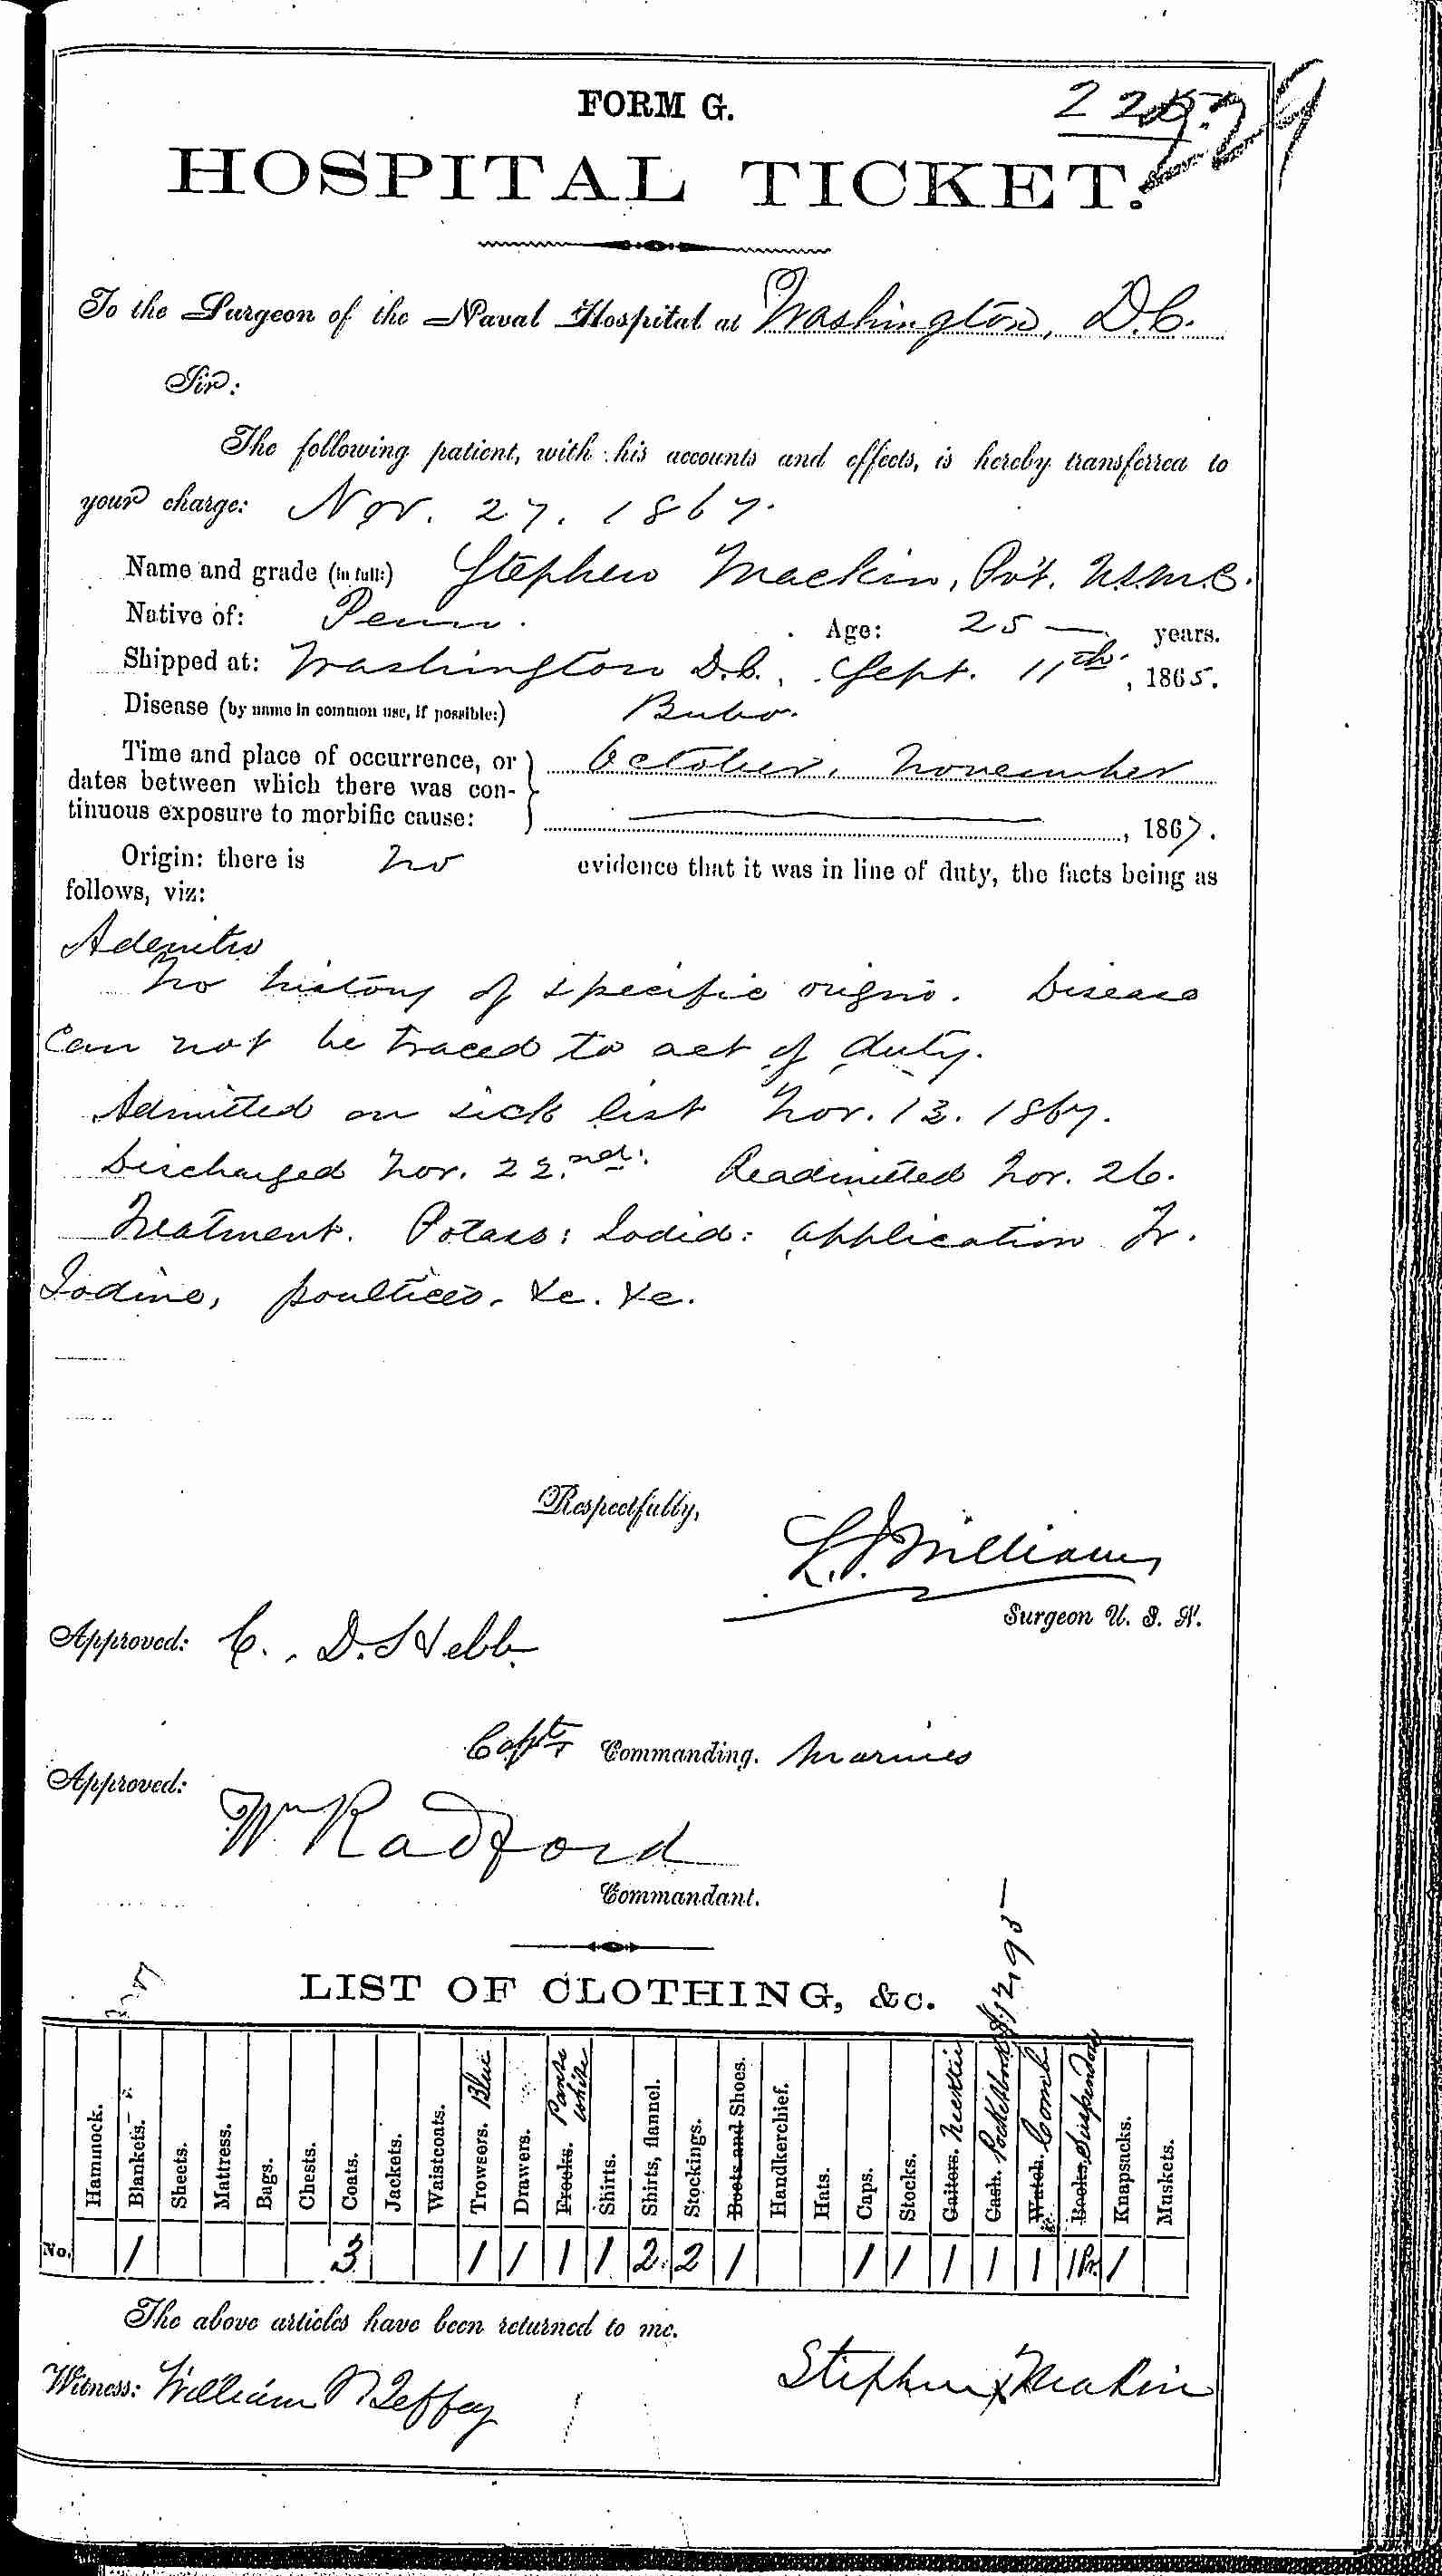 Entry for Stephen Mackin (page 1 of 2) in the log Hospital Tickets and Case Papers - Naval Hospital - Washington, D.C. - 1866-68